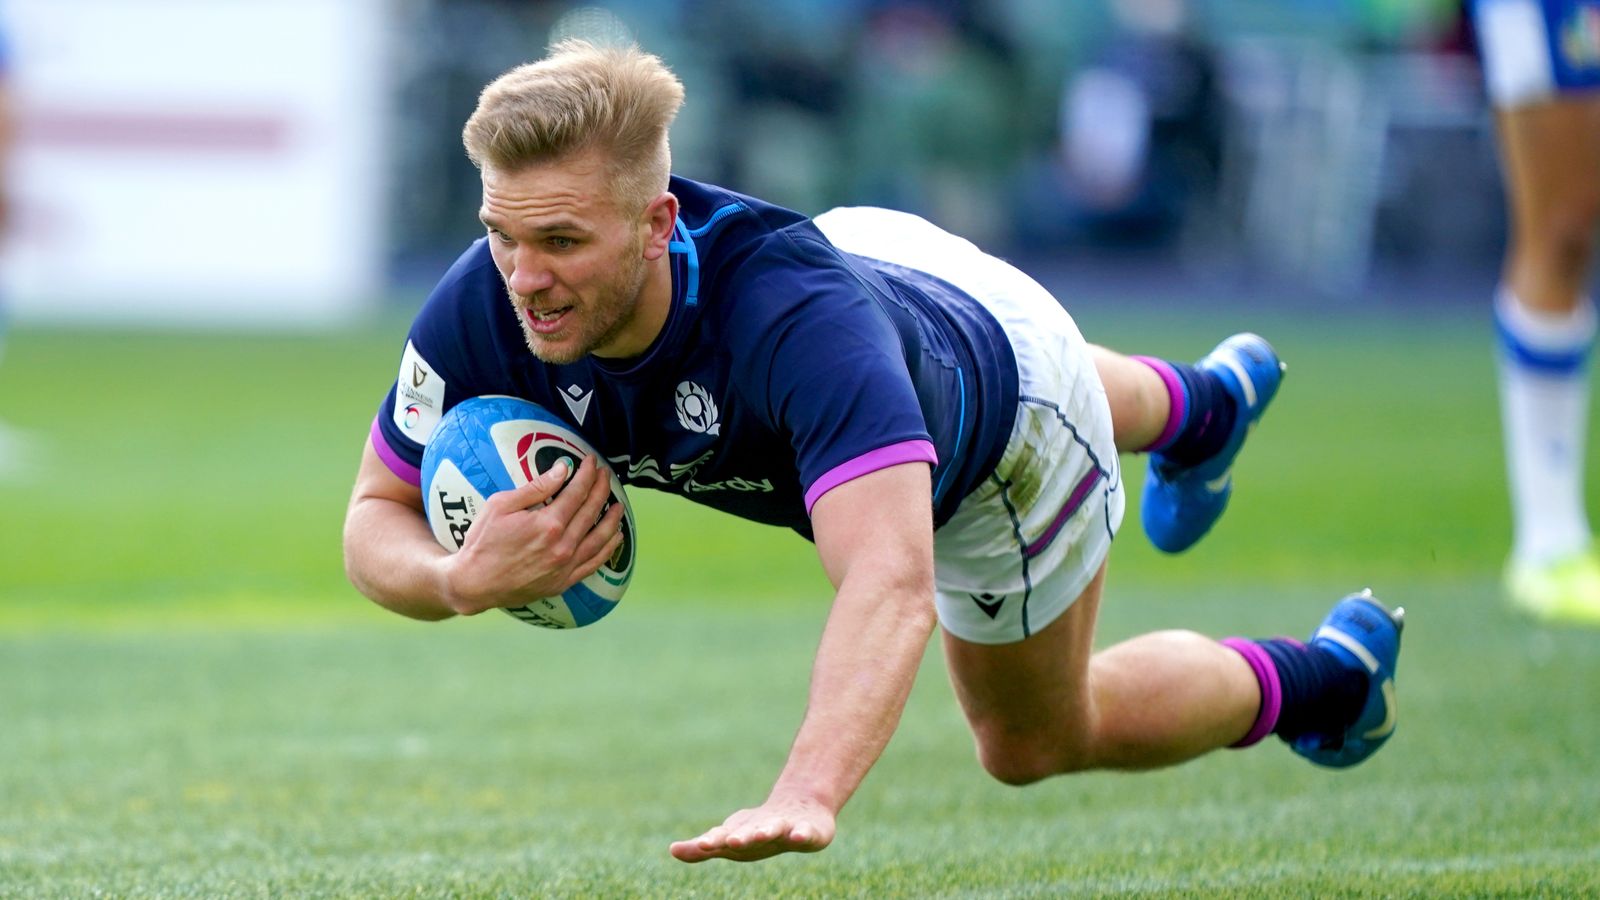 Italy 22-33 Scotland: Visitors win in Rome to pick up first Six Nations win since opening round